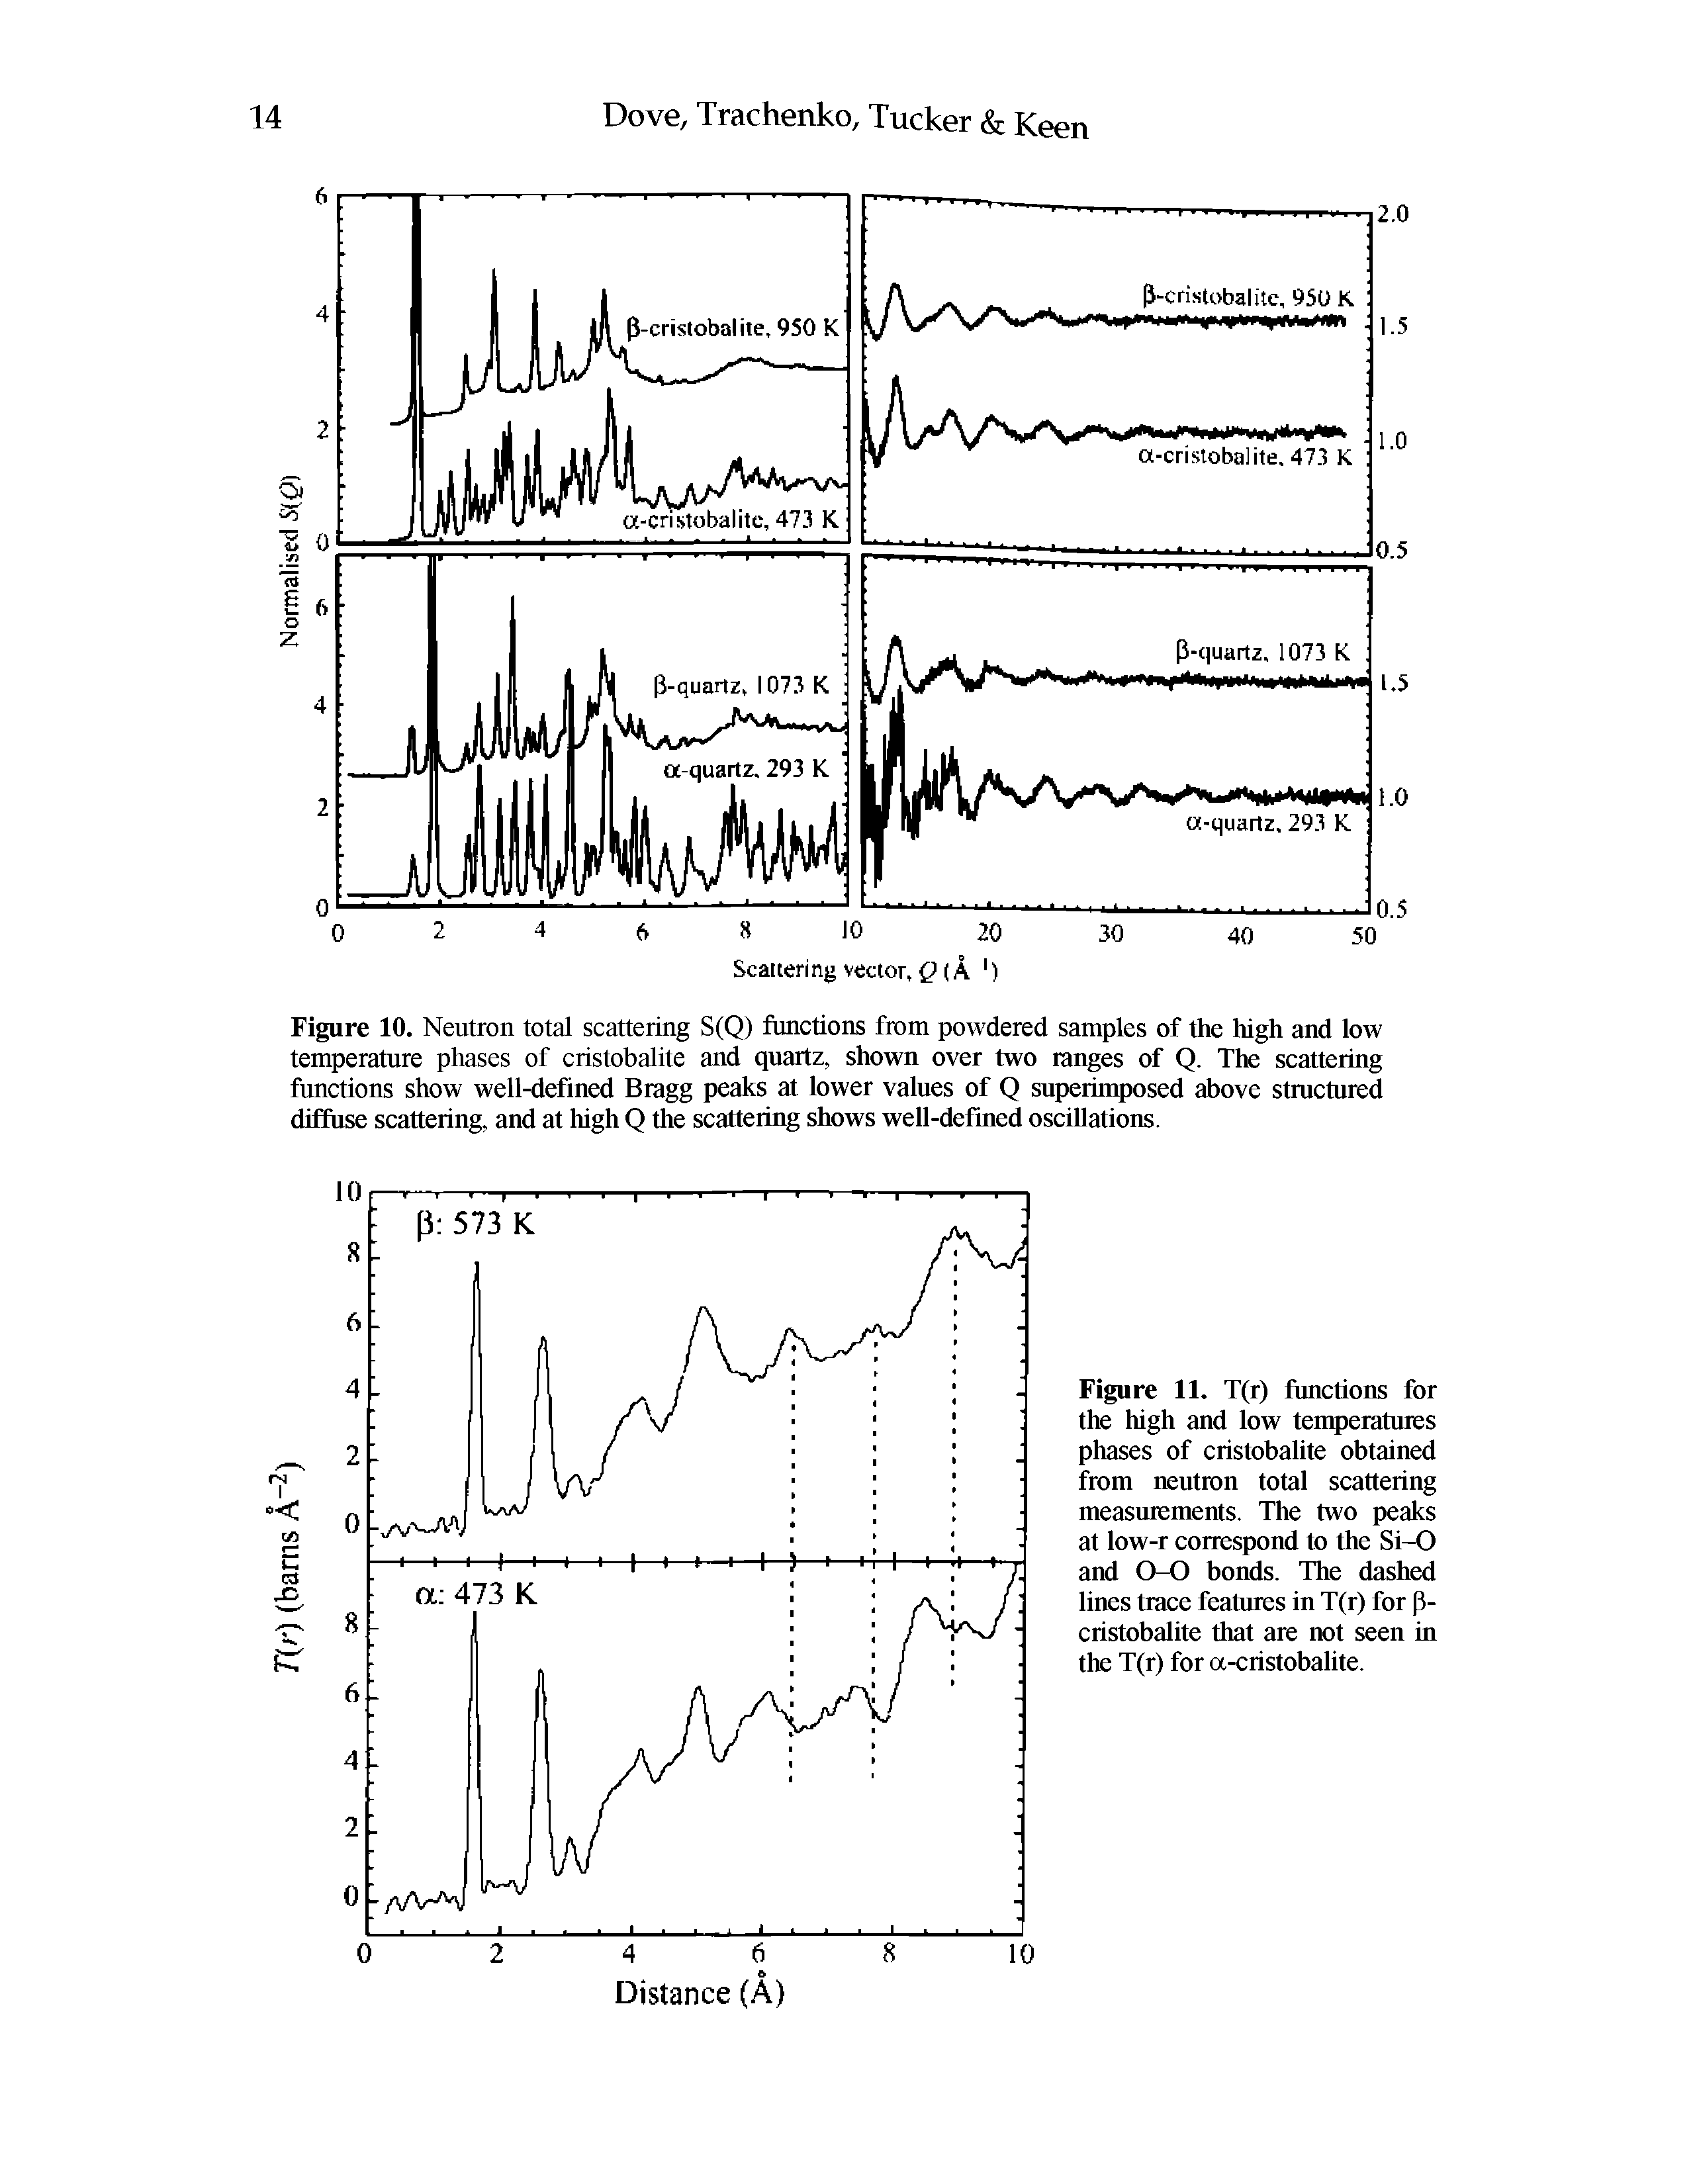 Figure 11. T(r) functions for the high and low temperatures phases of cristobalite obtained from neutron total scattering measurements. The two peaks at low-r correspond to the Si-0 and 0-0 bonds. The dashed lines trace features in T(r) for p-cristobalite that are not seen in the T(r) for a-cristobalite.